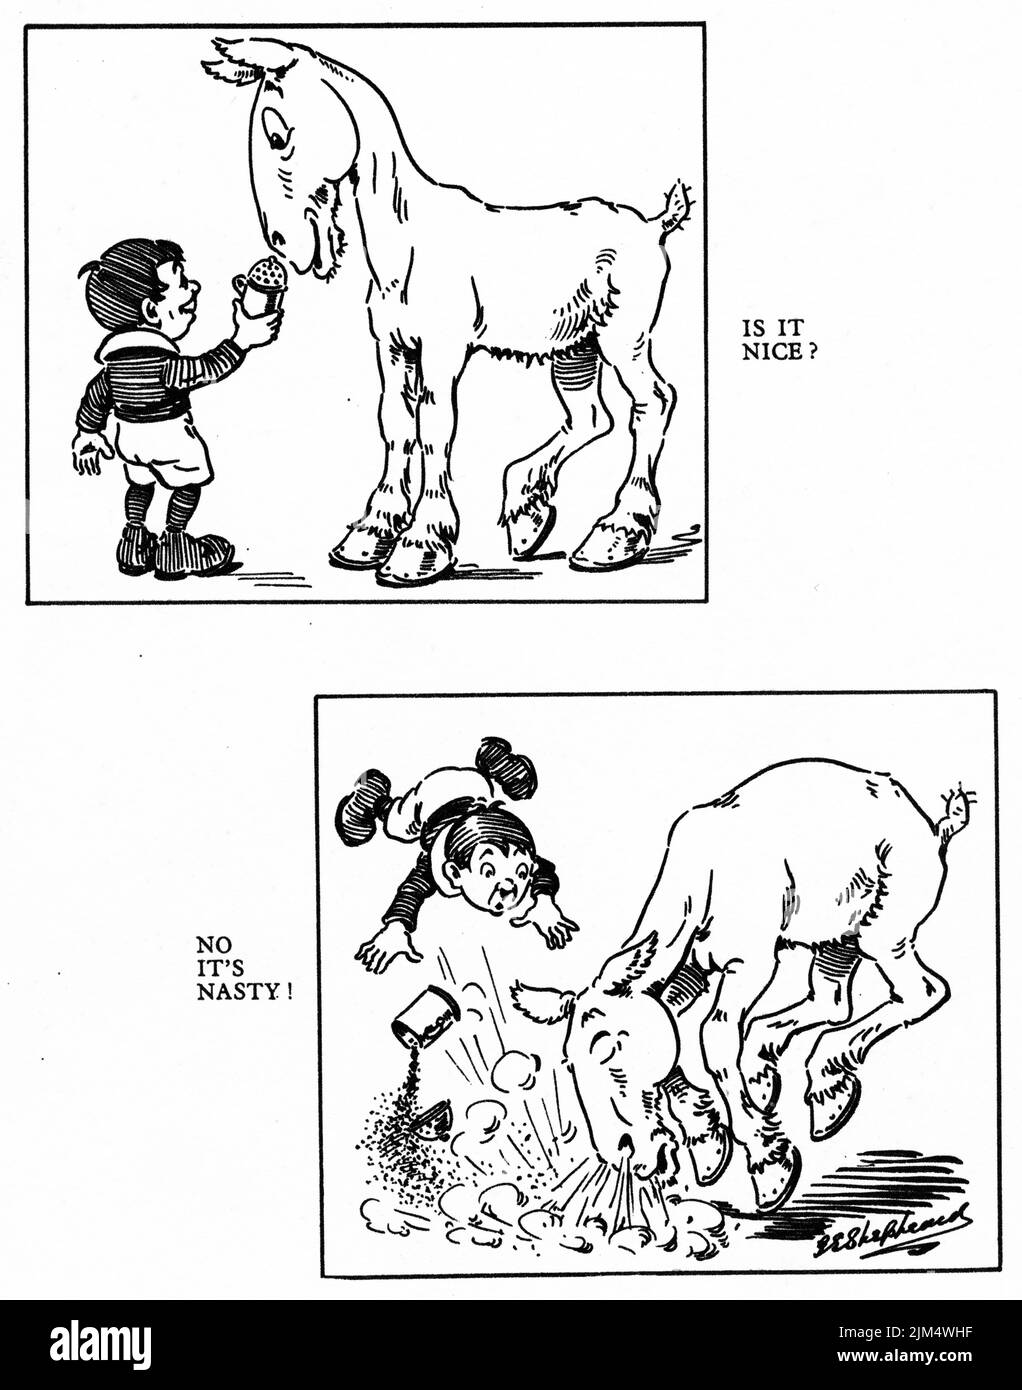 Cartoon of a mischievous boy holding pepper up to a horse's nose, making the horse sneeze violently Stock Photo